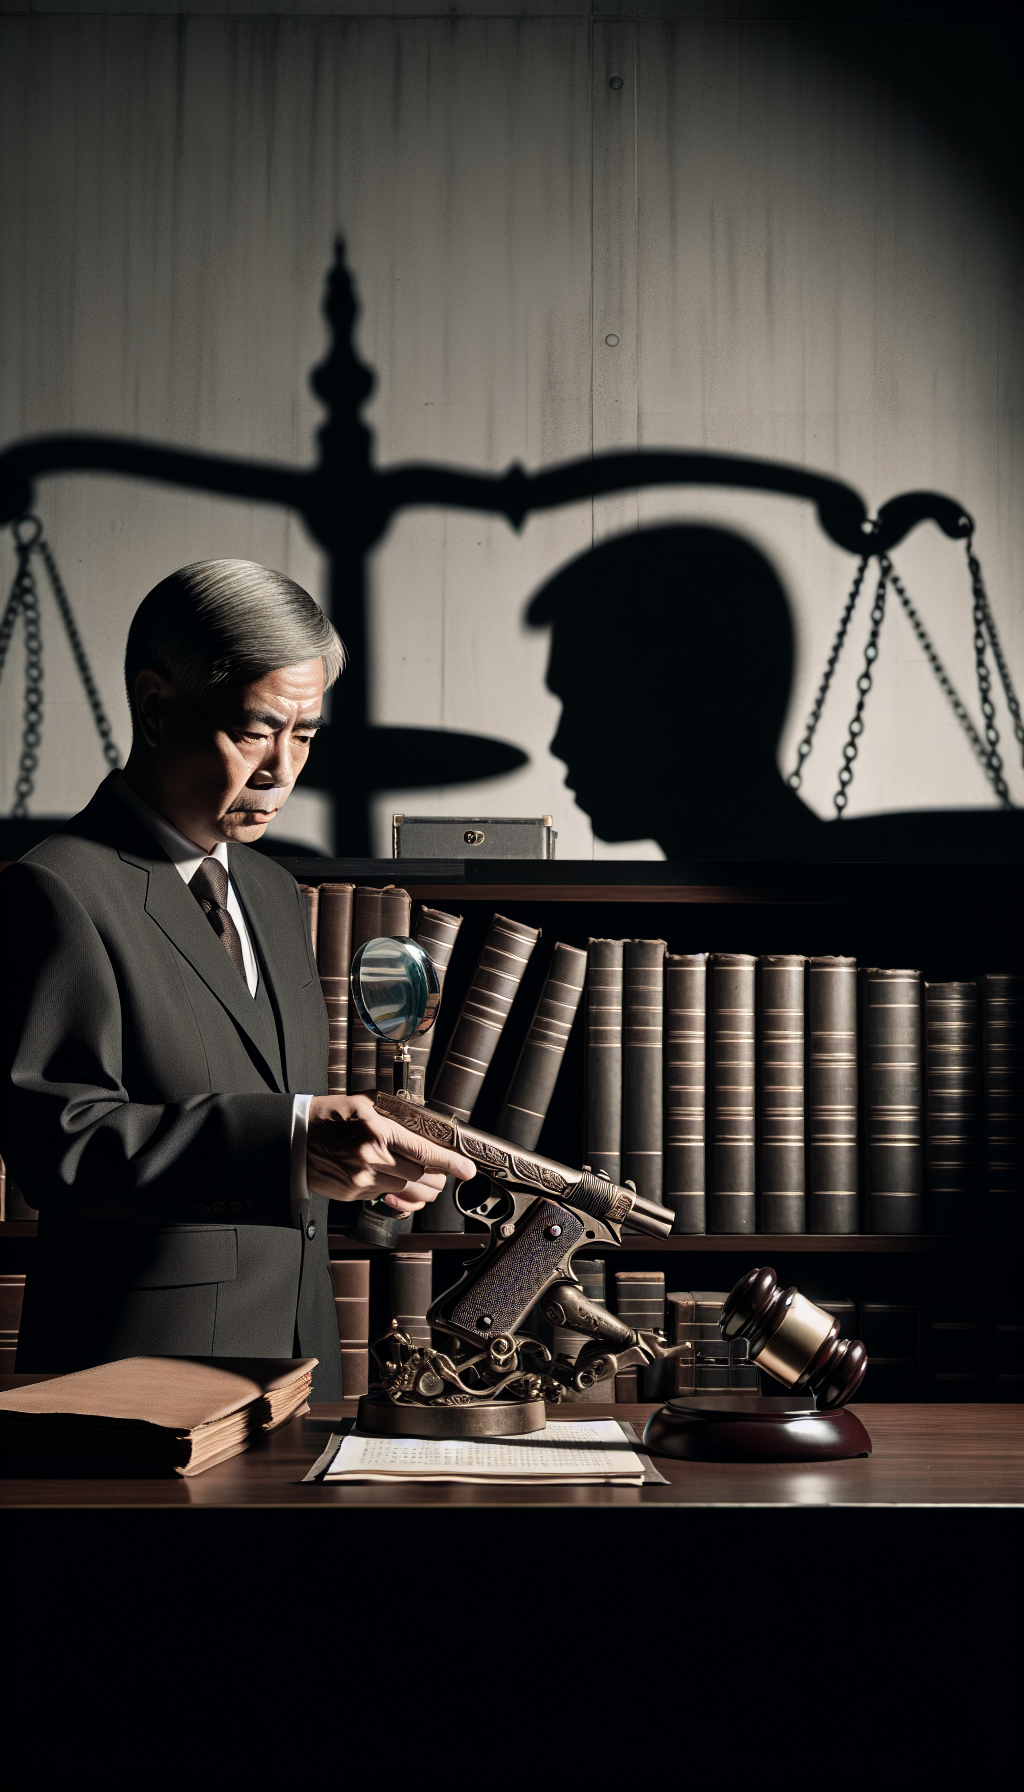 An old-timey detective stands behind a classic wooden desk, magnifying glass in hand, scrutinizing an ornate antique firearm, with scales of justice balanced on the barrel. In the background, a wall of legal books casts long shadows over the scene, implying the importance of adherence to legal parameters within the antique gun appraisal process.